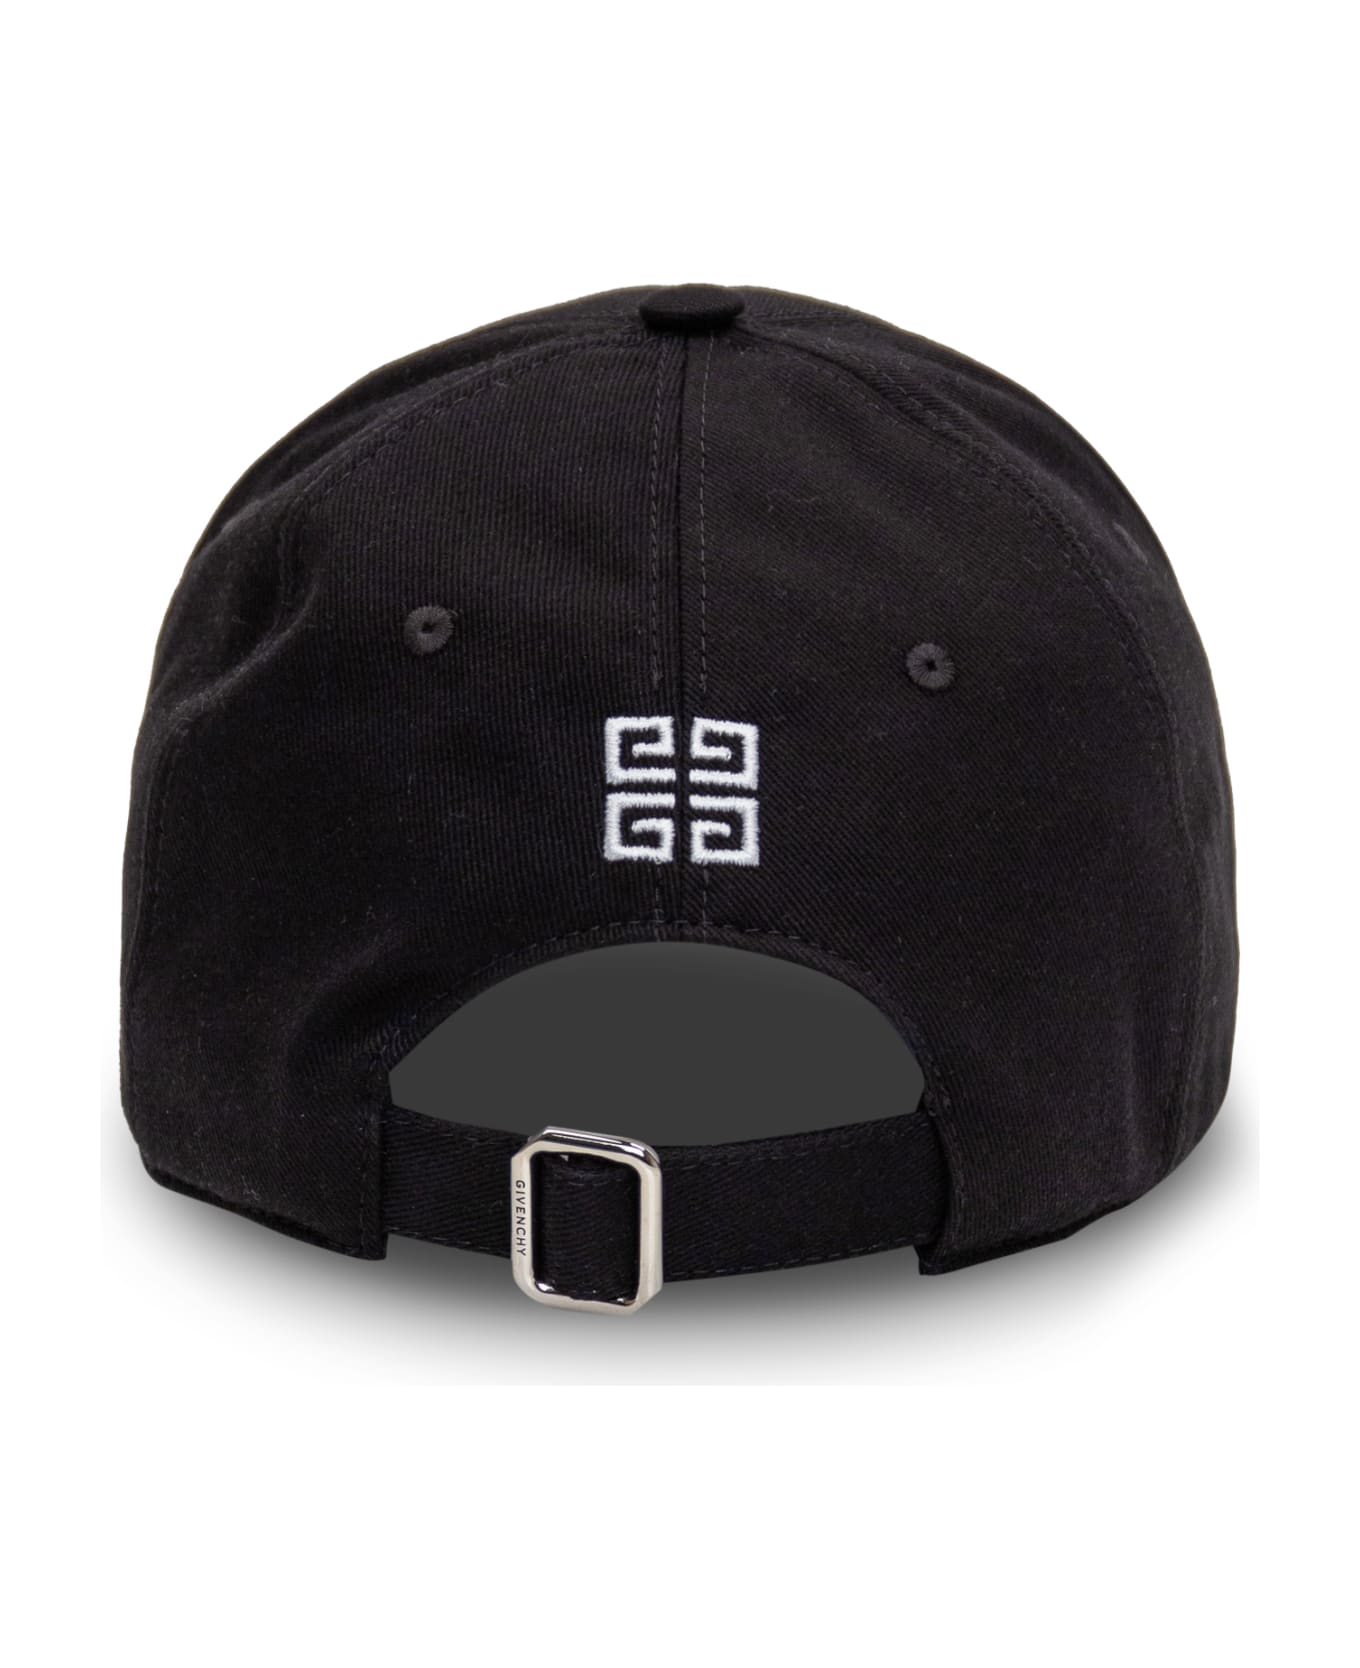 Givenchy Black Baseball Hat With Givenchy College Embroidery - Black